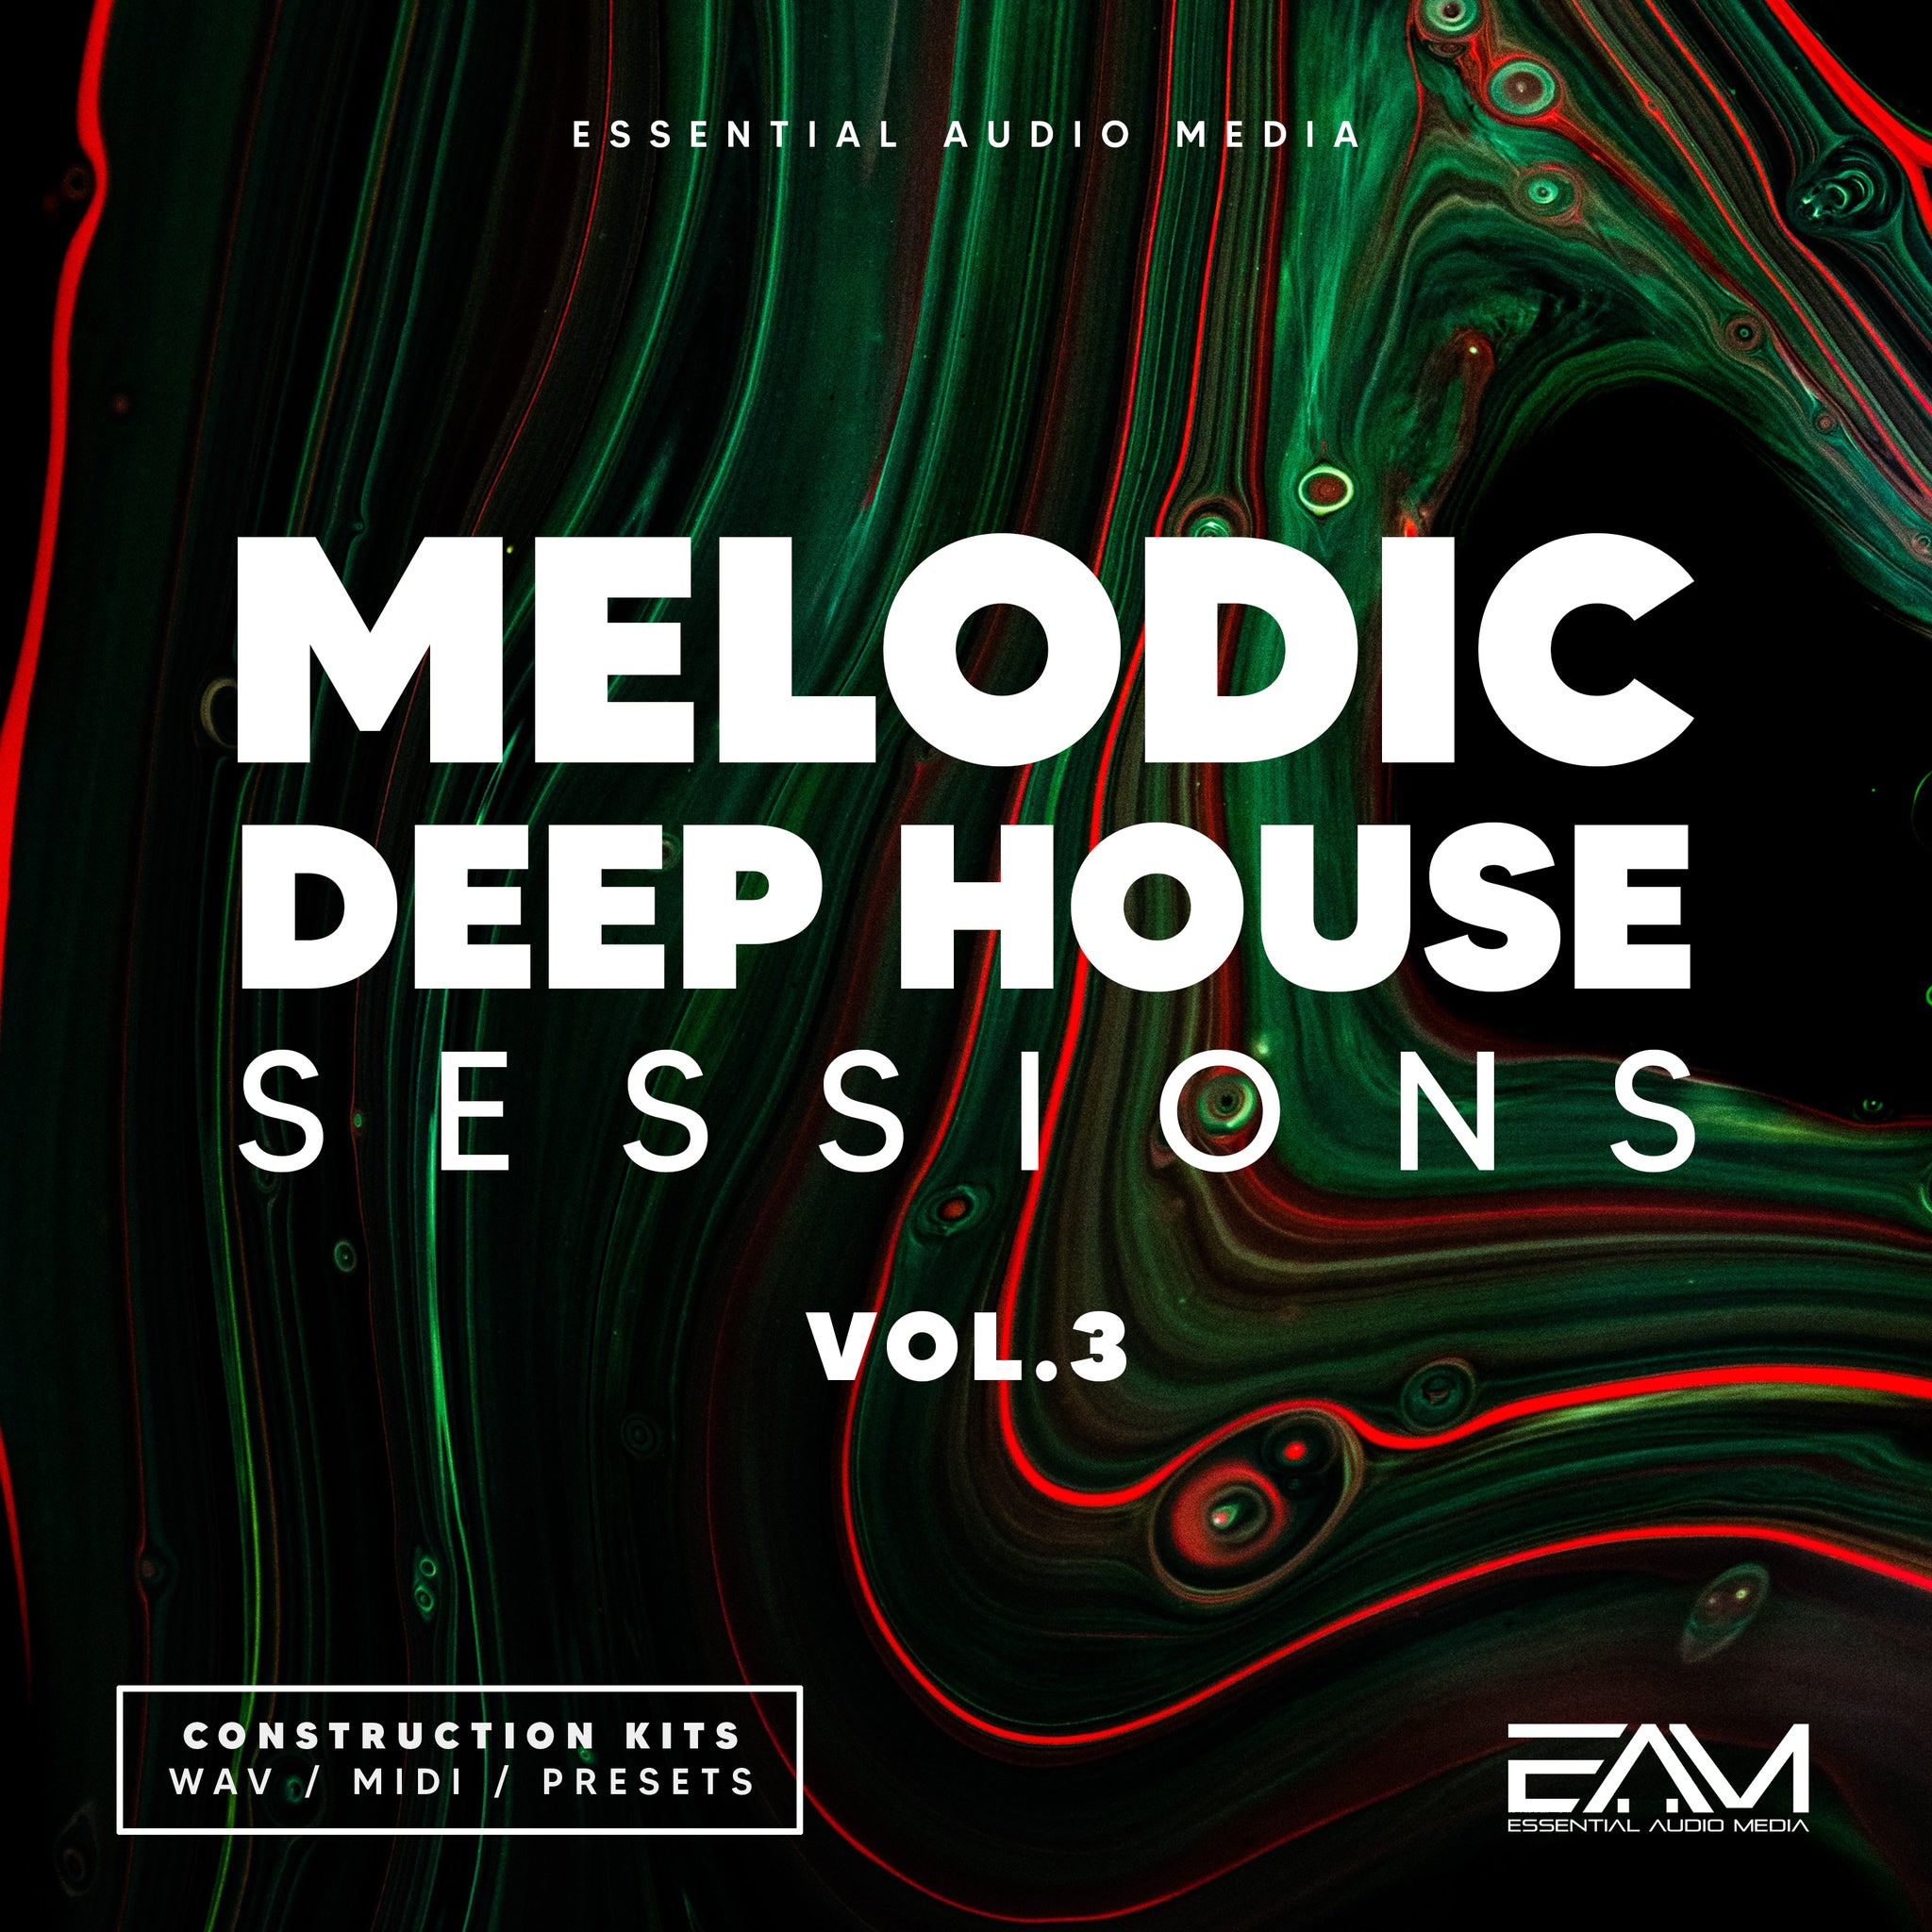 Melodic Deep House Sessions Vol.3